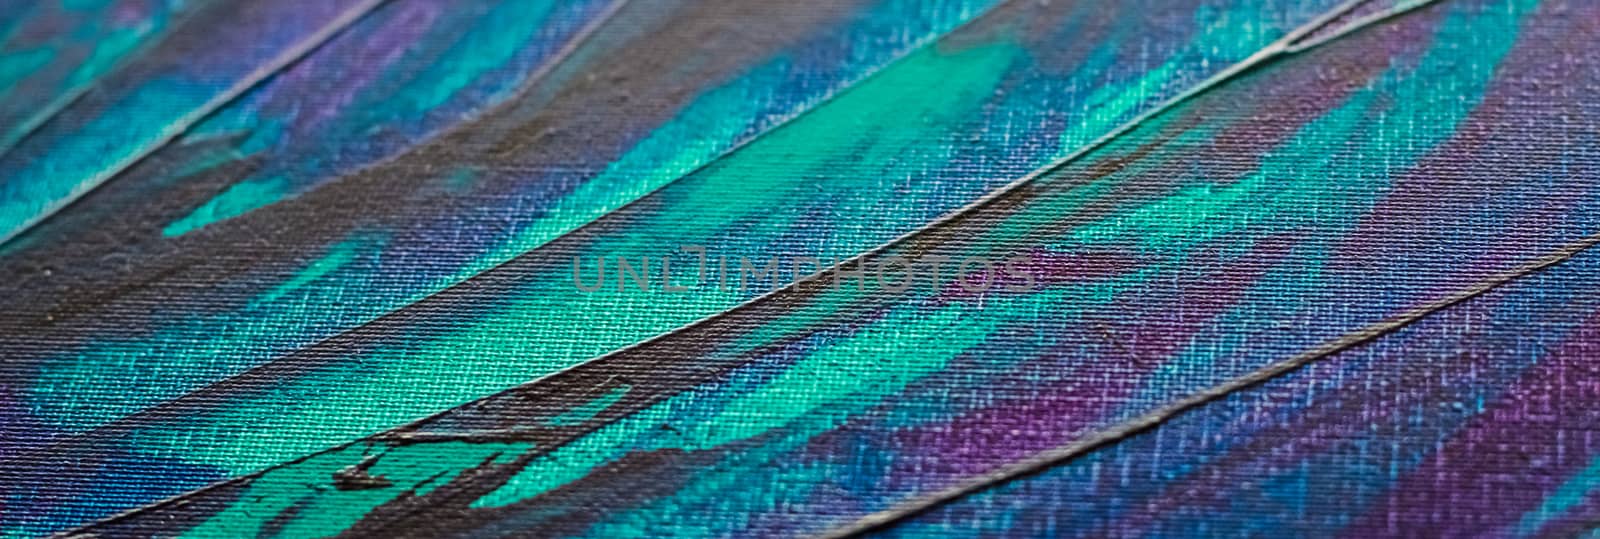 Mix of blue, turquoise and purple abstract background, painting  by Anneleven